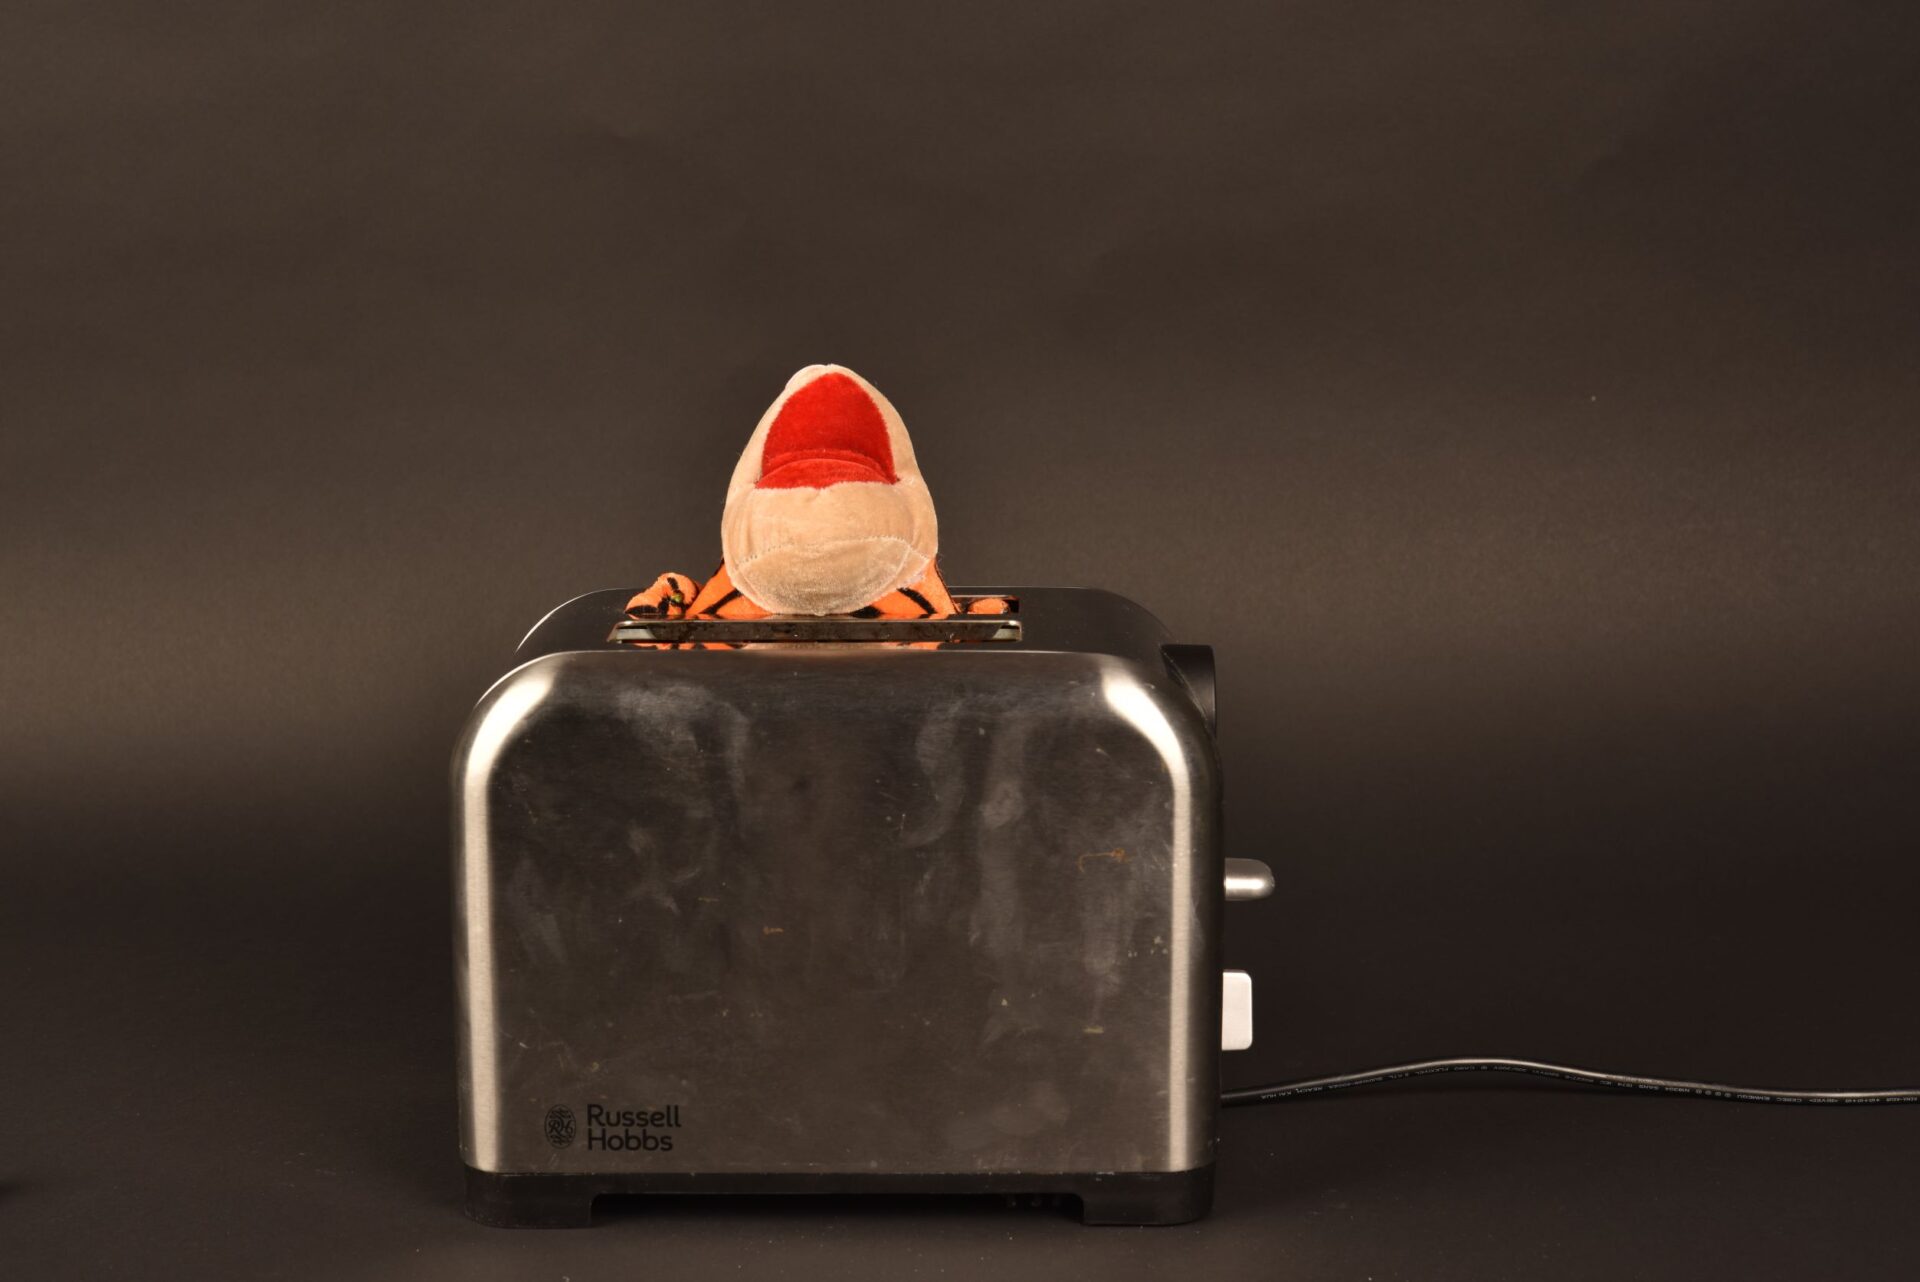 Tigger in a toaster III, Disney Tigger toy, Russell Hobbs toaster, dimensions variable 2021 POA